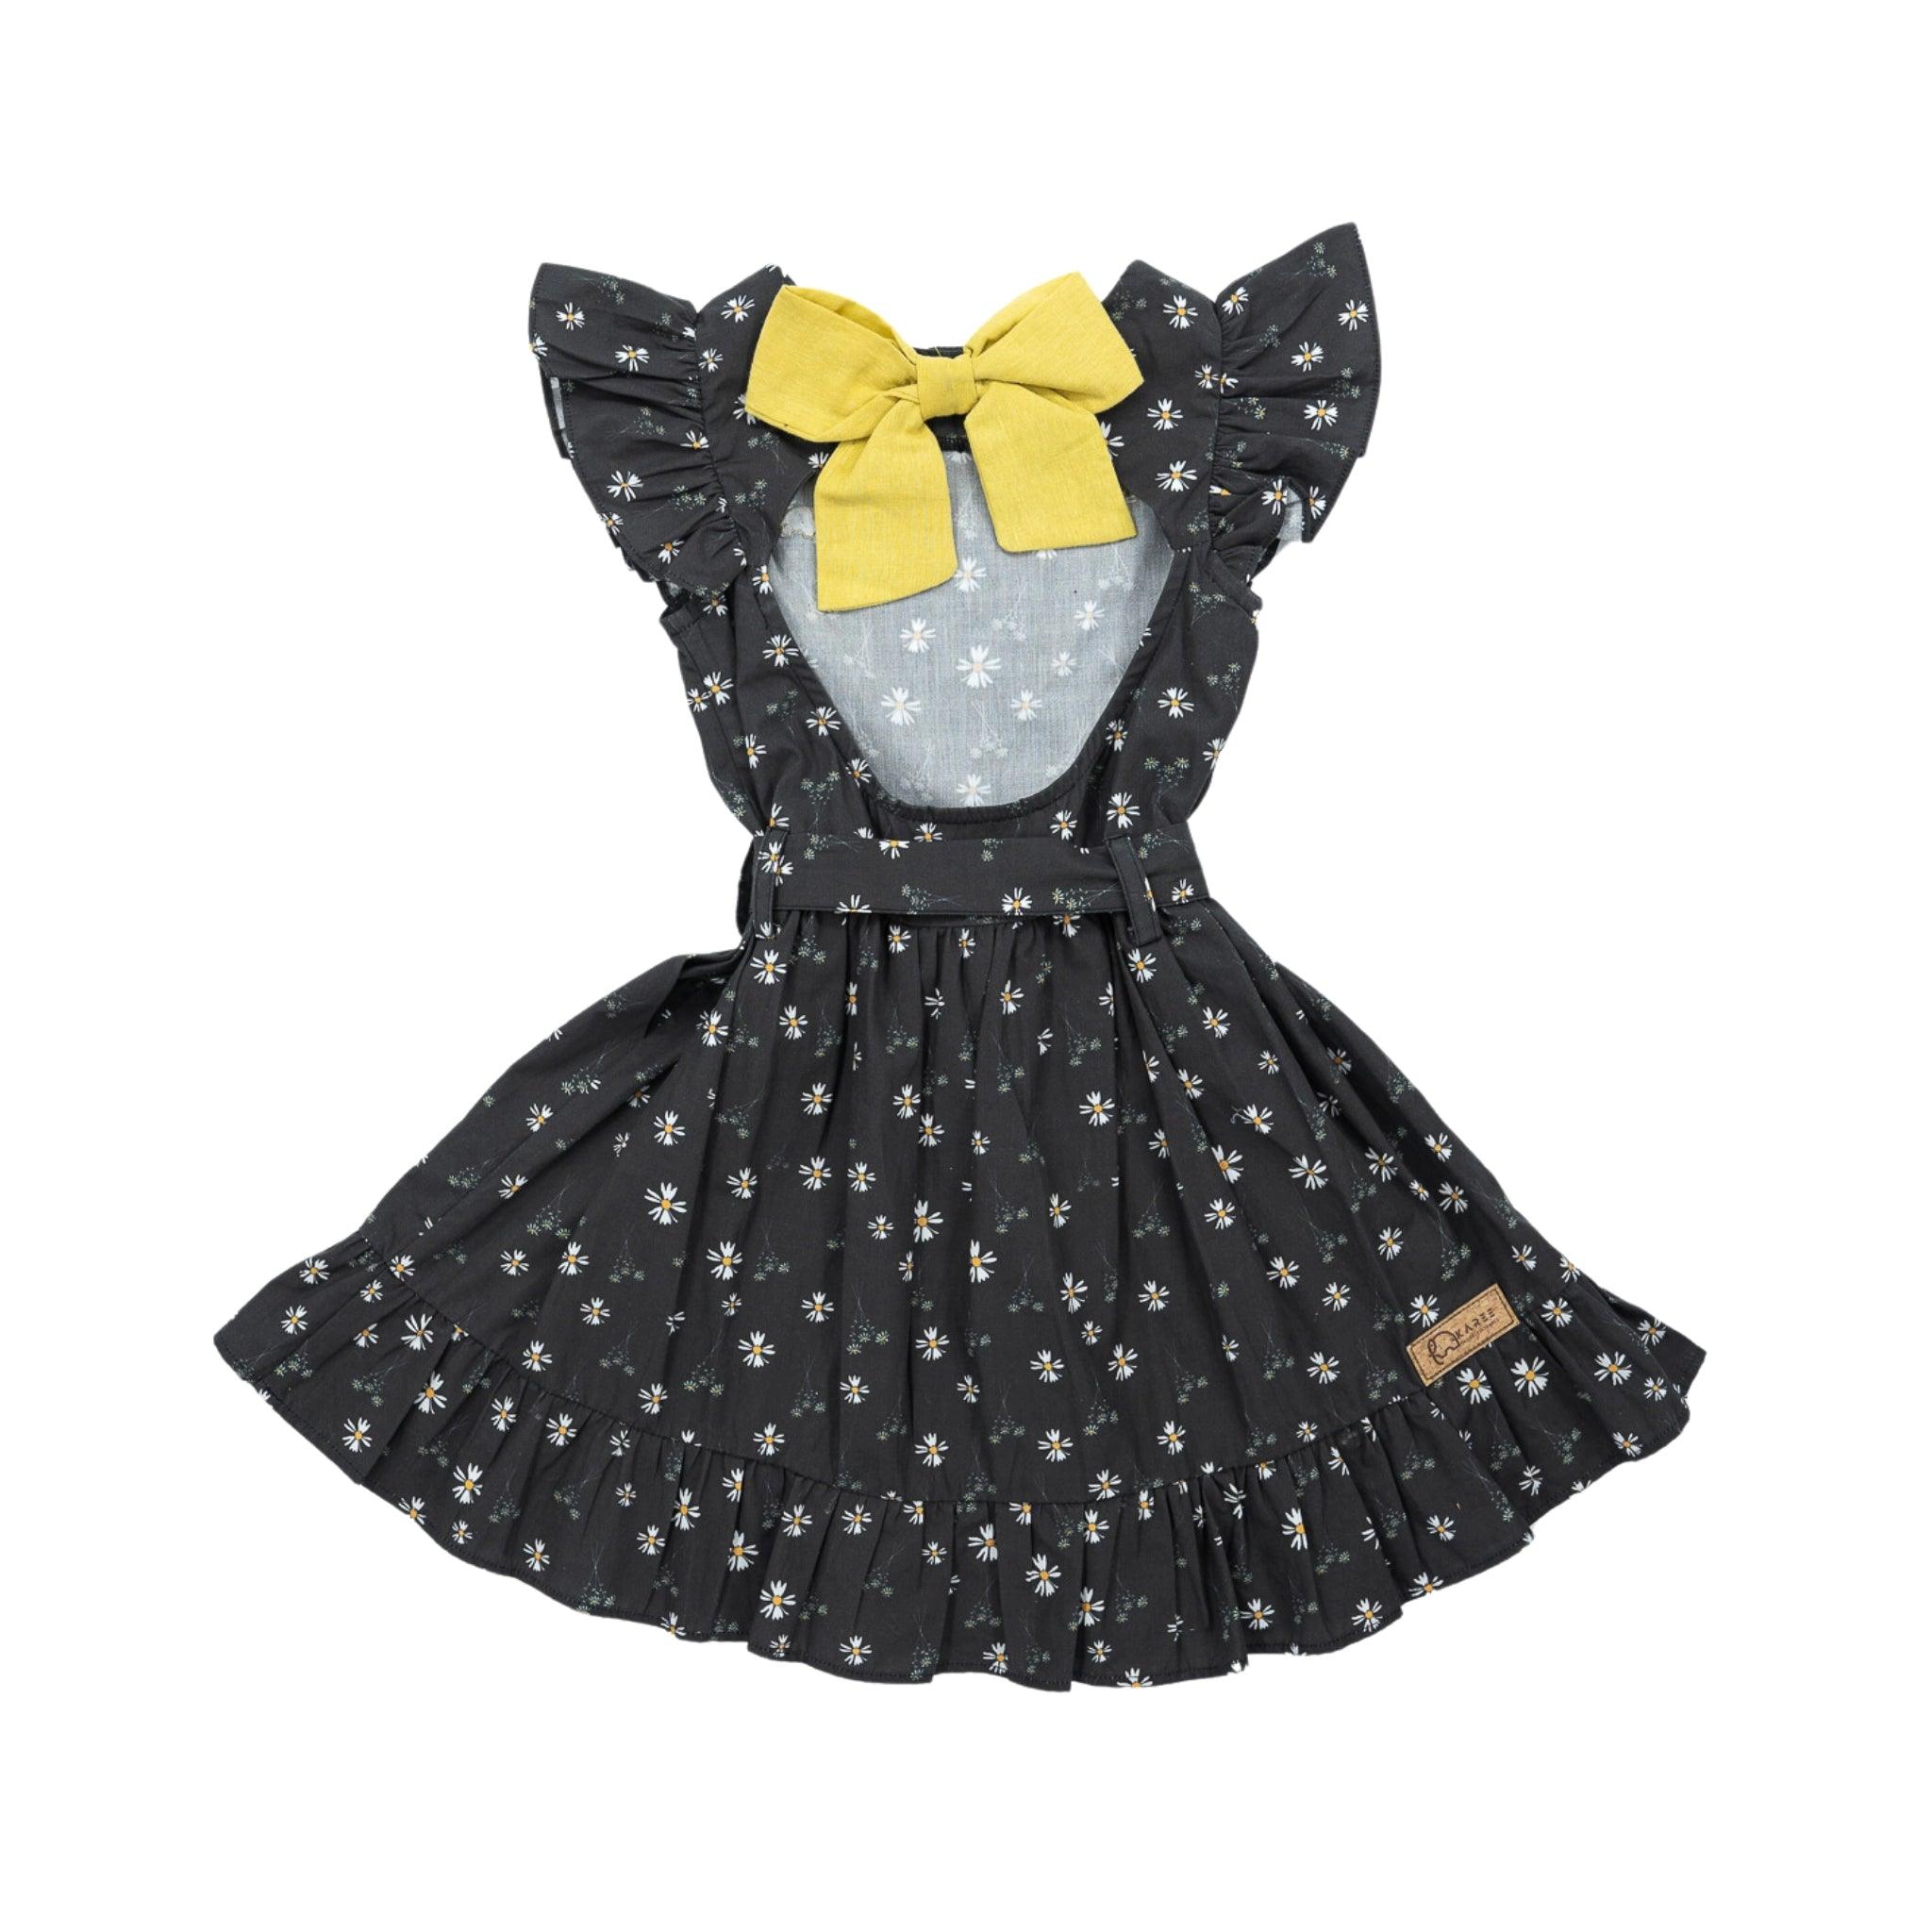 A Karee Petite Blossom Black Cotton Dress with a yellow bow, flutter sleeves, and a skirt flared for volume, displayed against a white background.